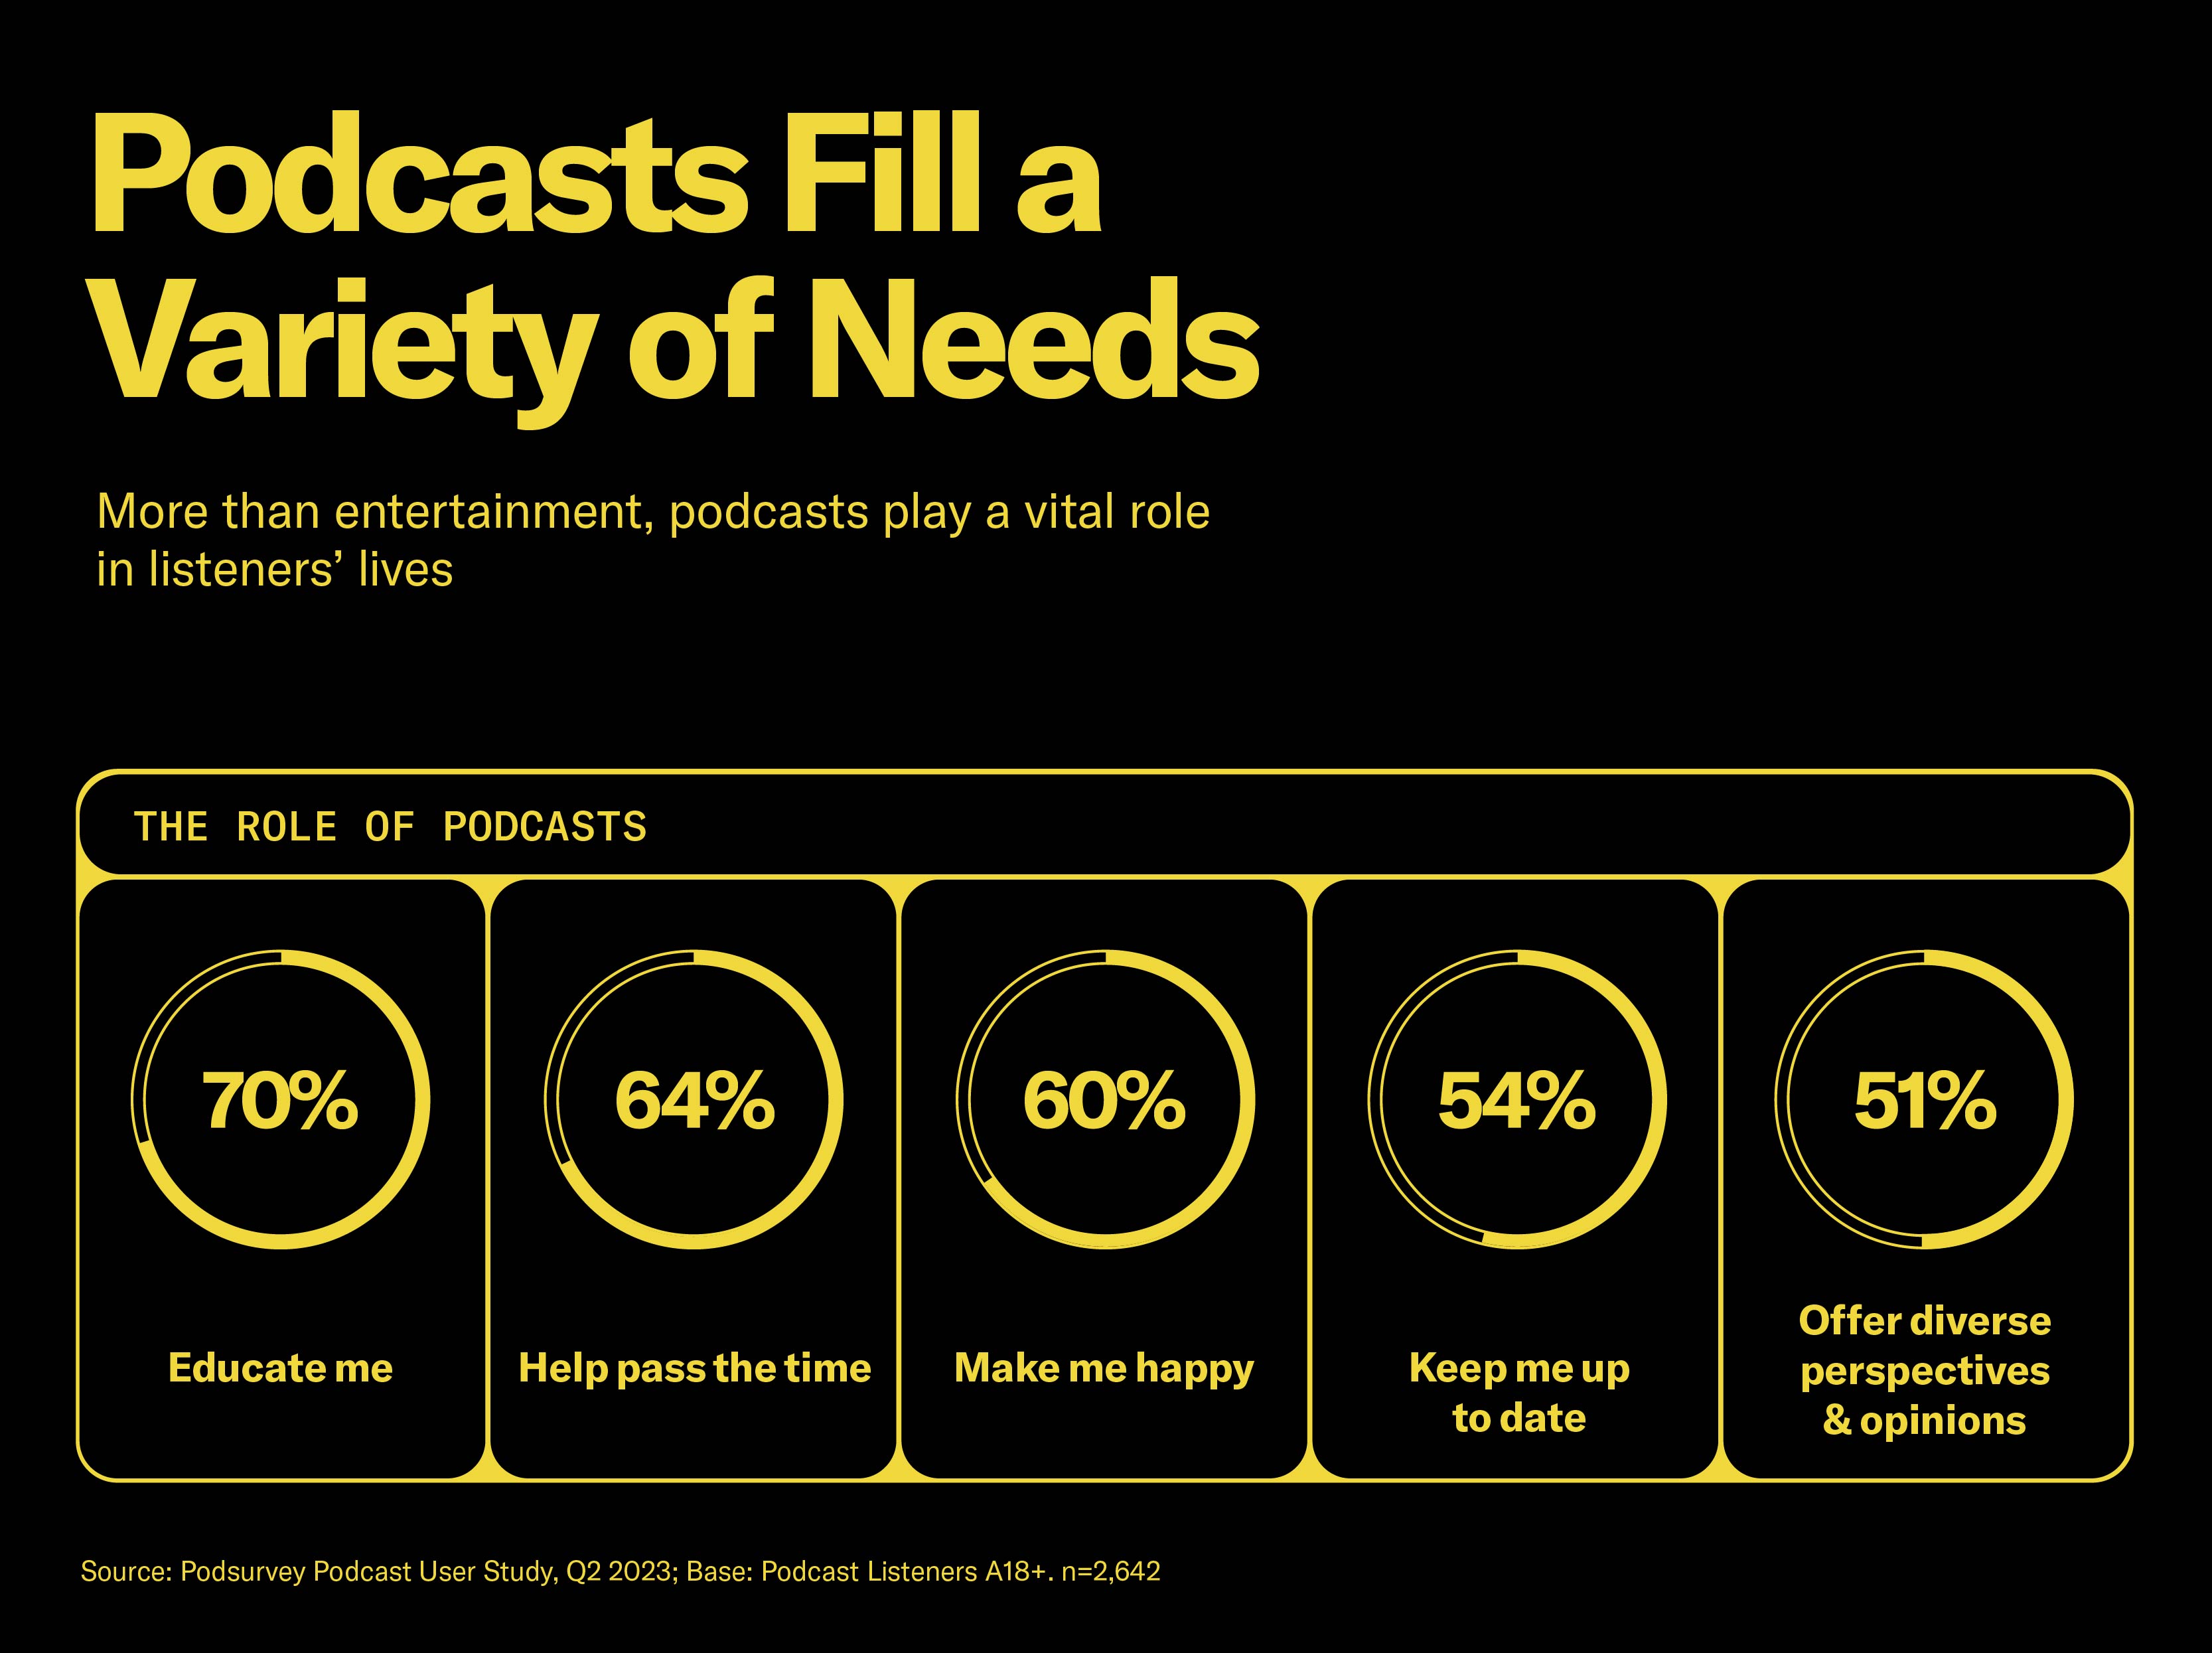 Podcasts fill a variety of needs for listeners